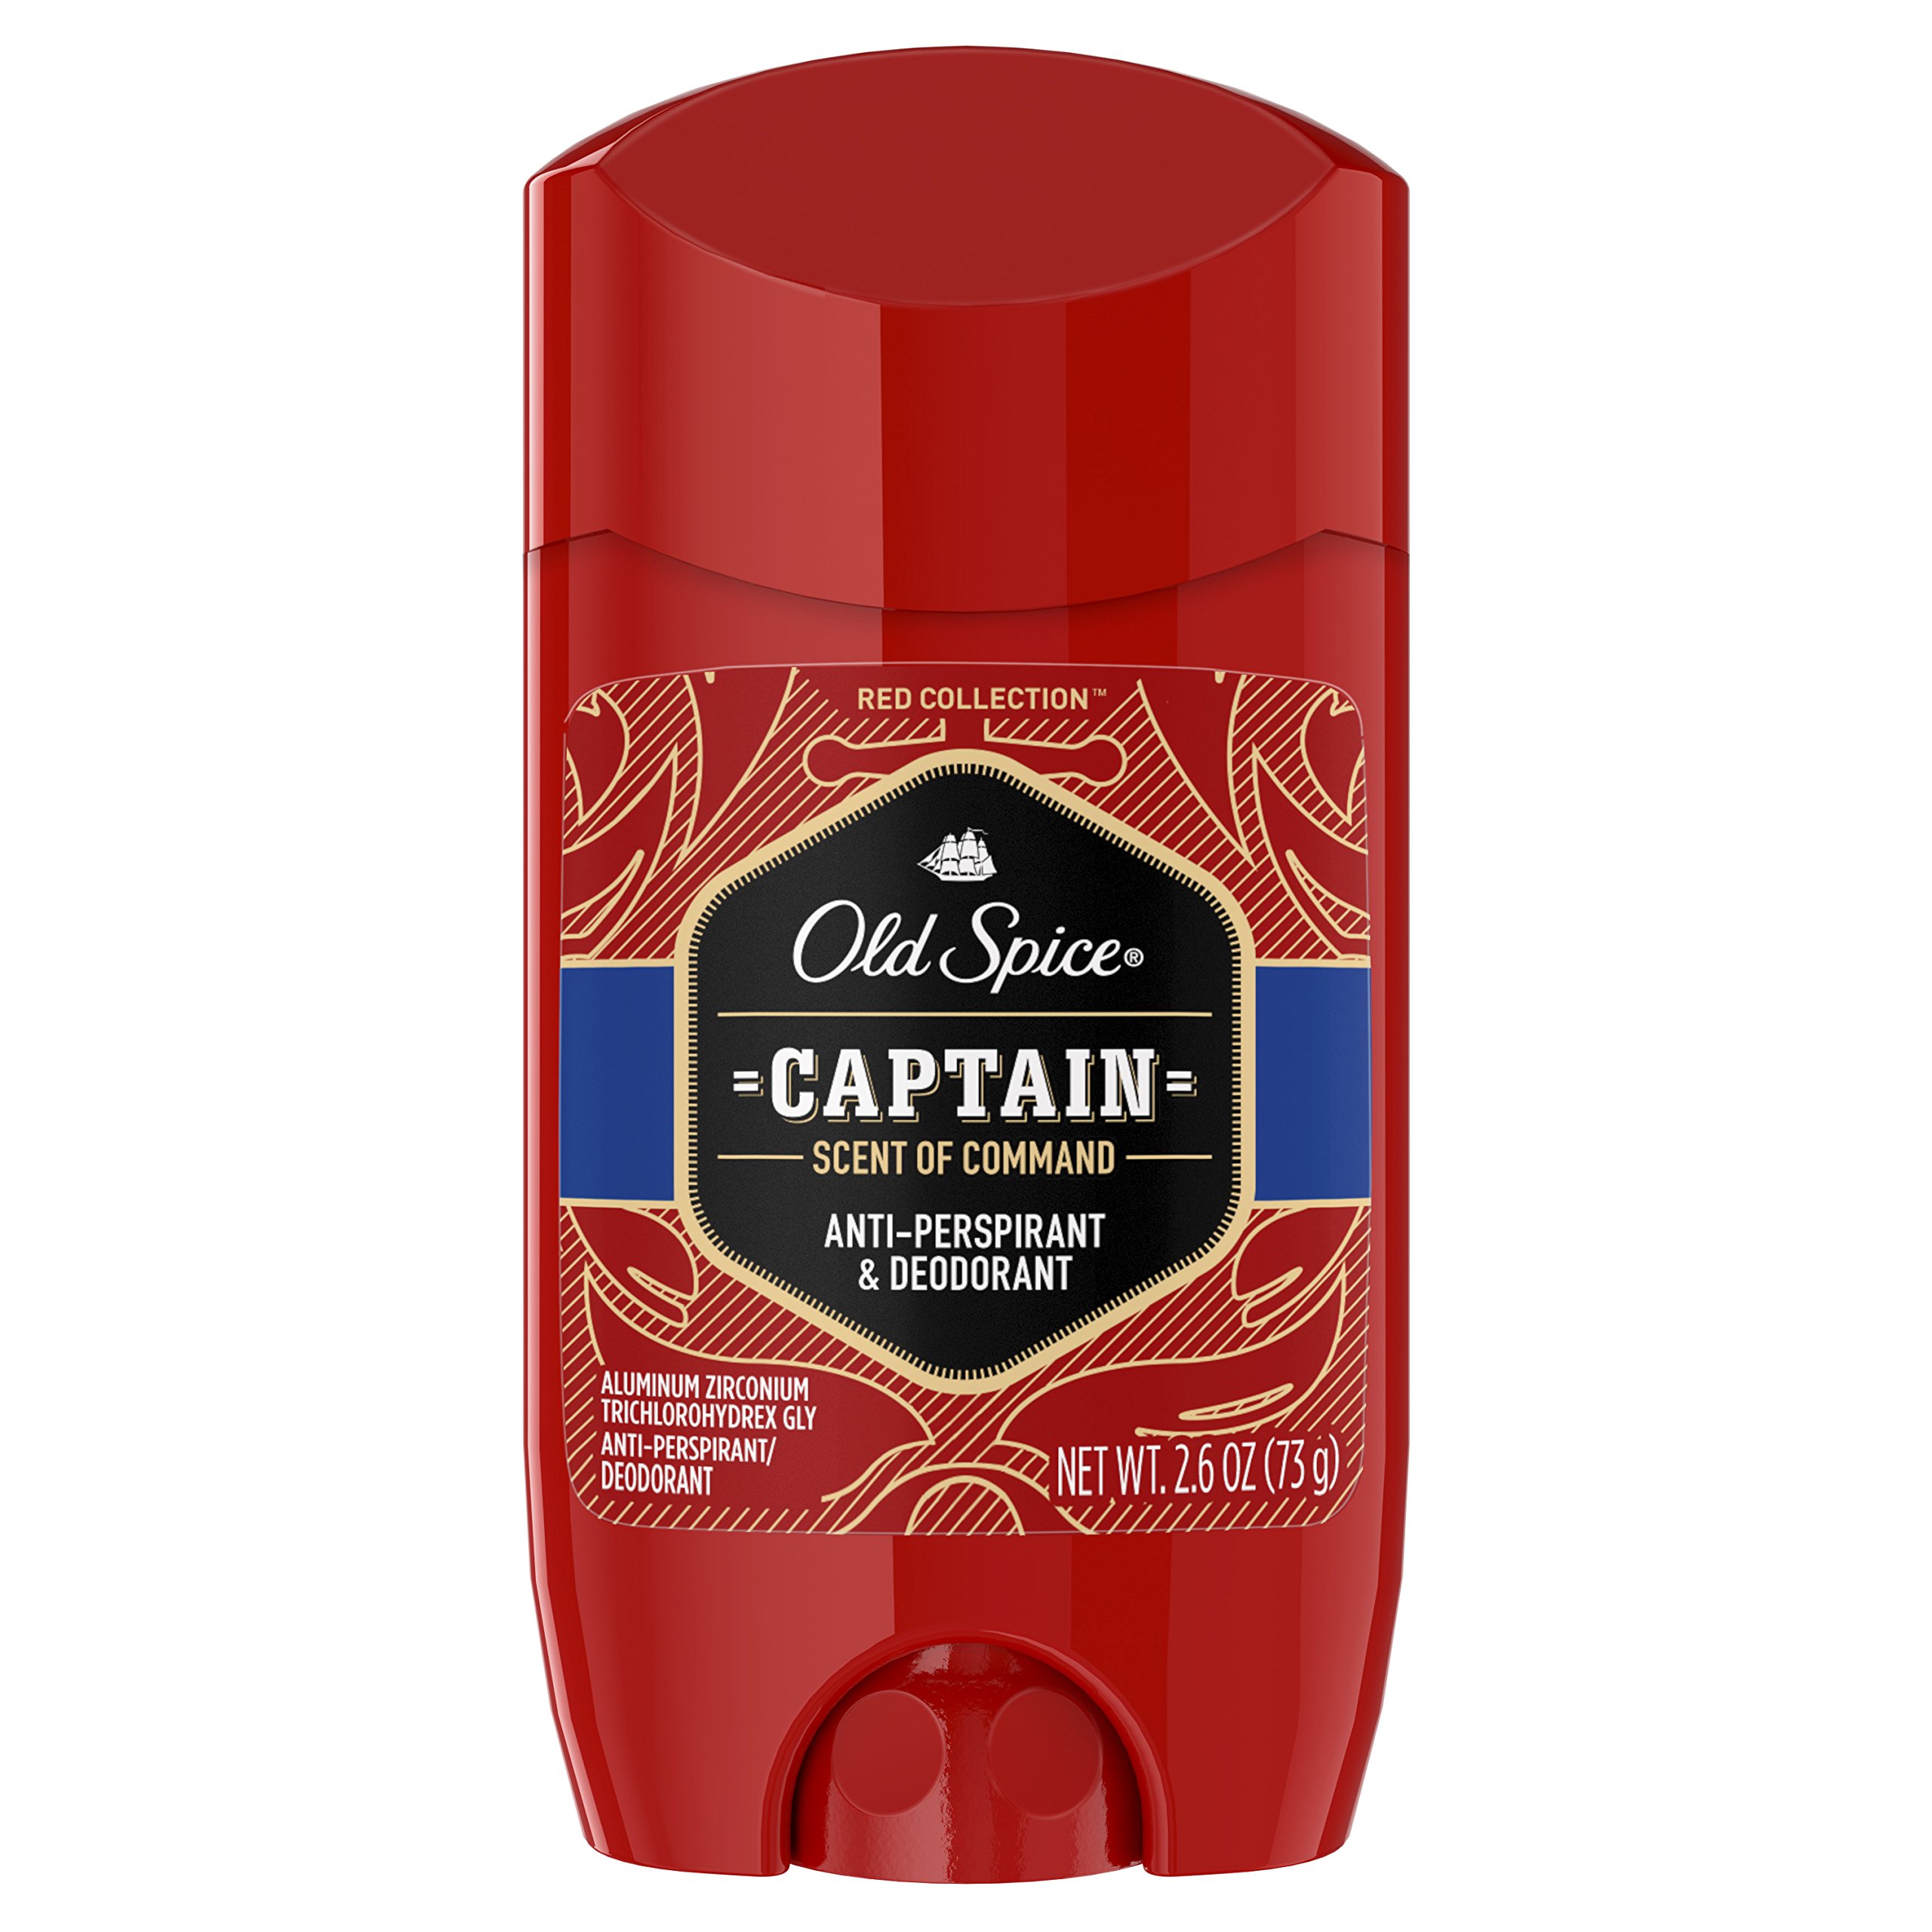 Old Spice Red Collection Captain Scent Invisible Solid Anti-Perspirant and Deodorant for Men 2.6 Oz.